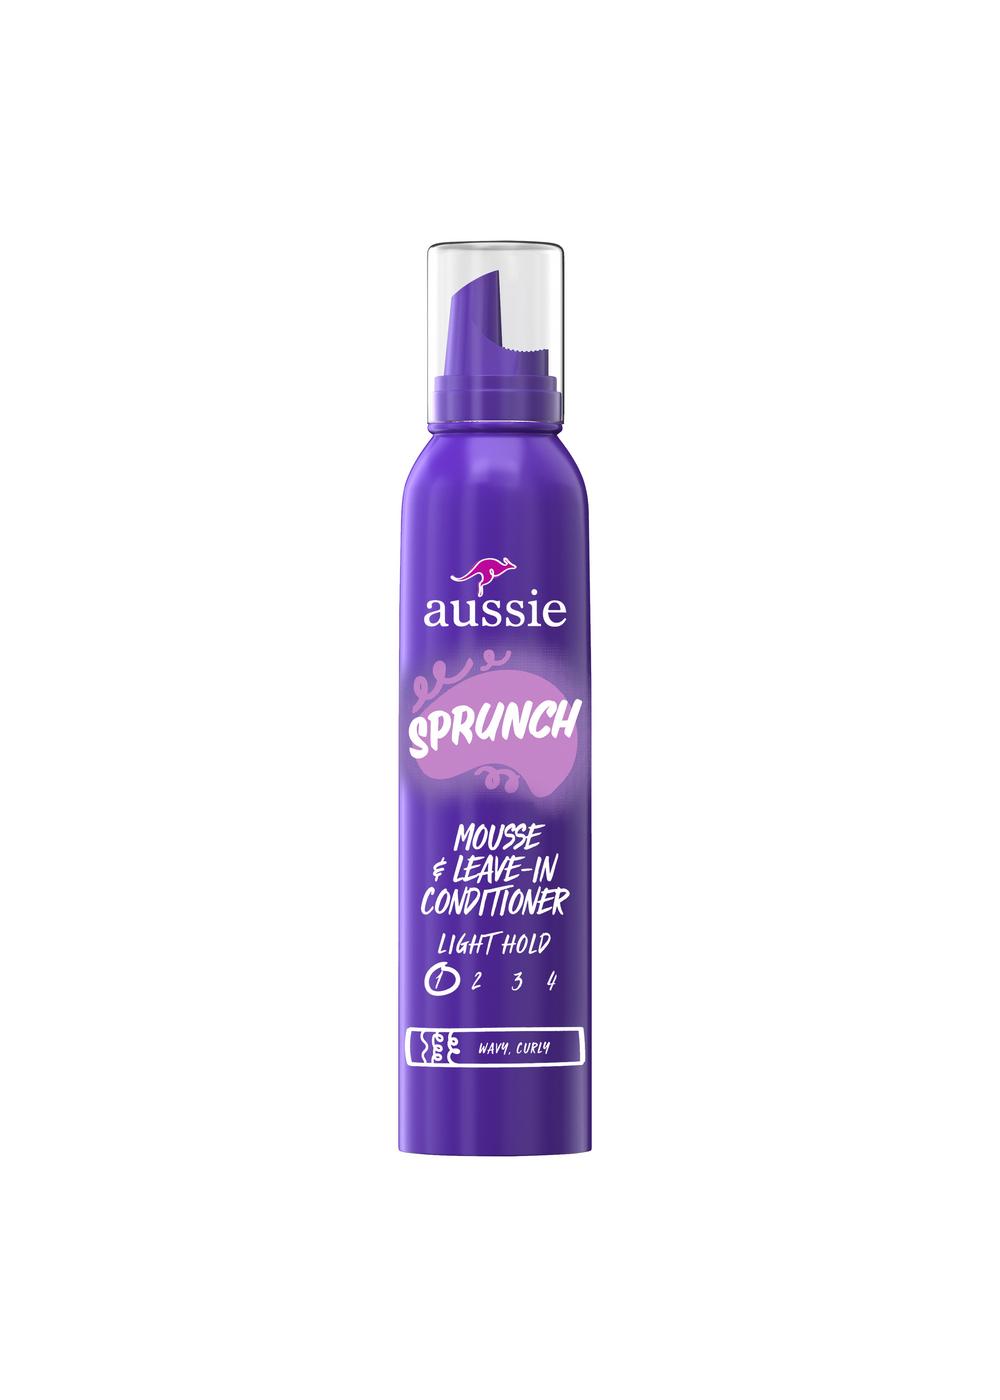 Aussie Sprunch Mousse & Leave-In Conditioner; image 1 of 11